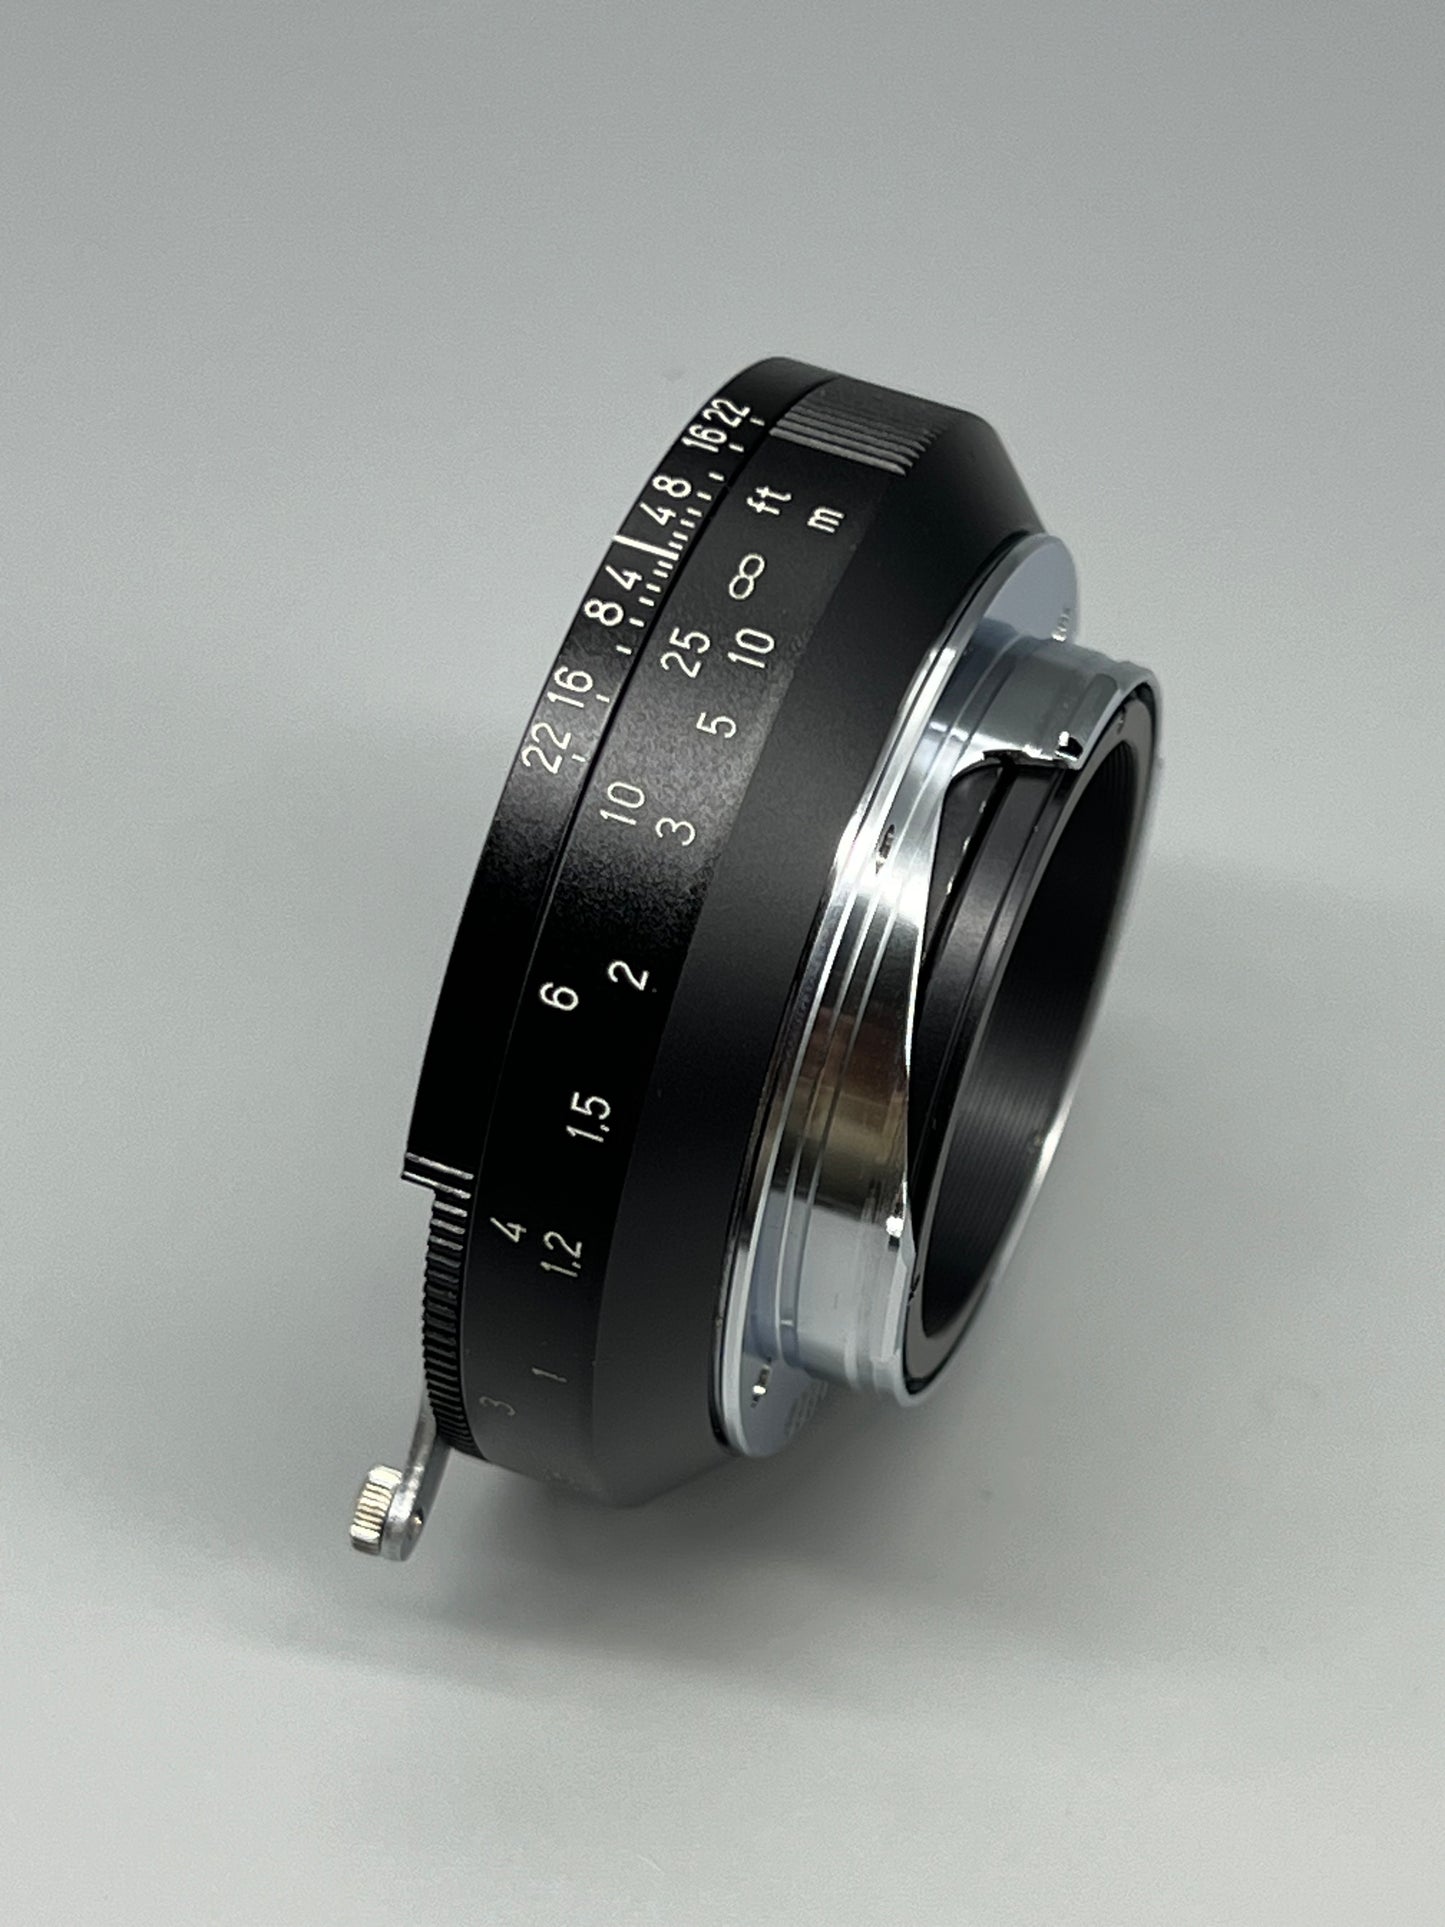 coupled EXA-LM（Version 2.0） R50 rangefinder-link adapter EXA mount lens to Leica M camera